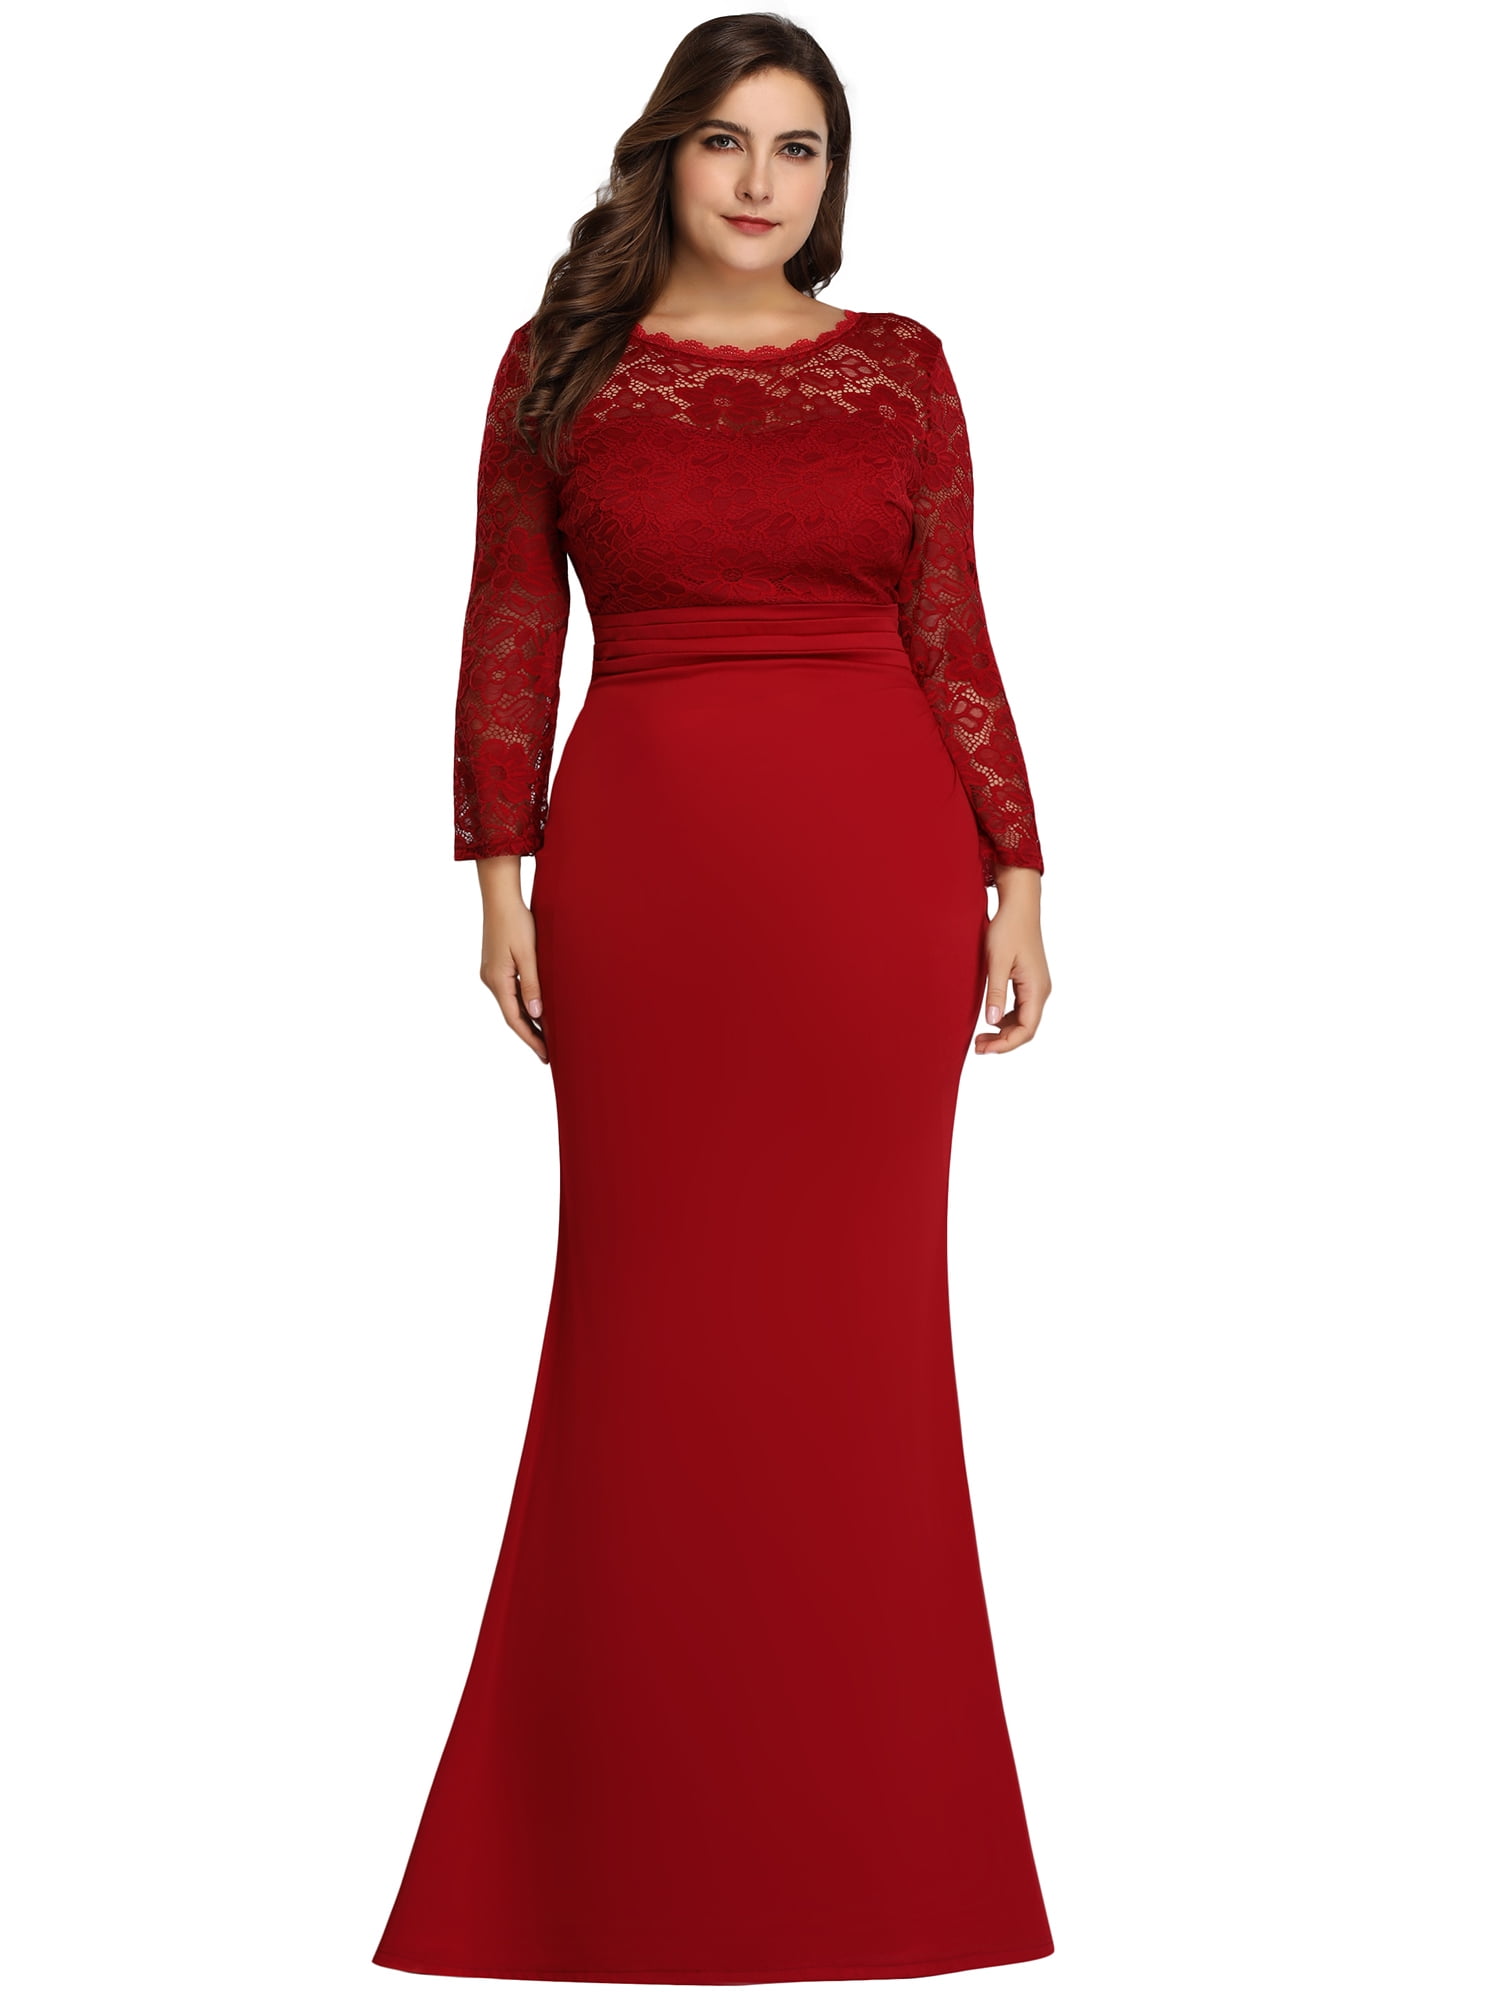 red and black plus size formal dresses